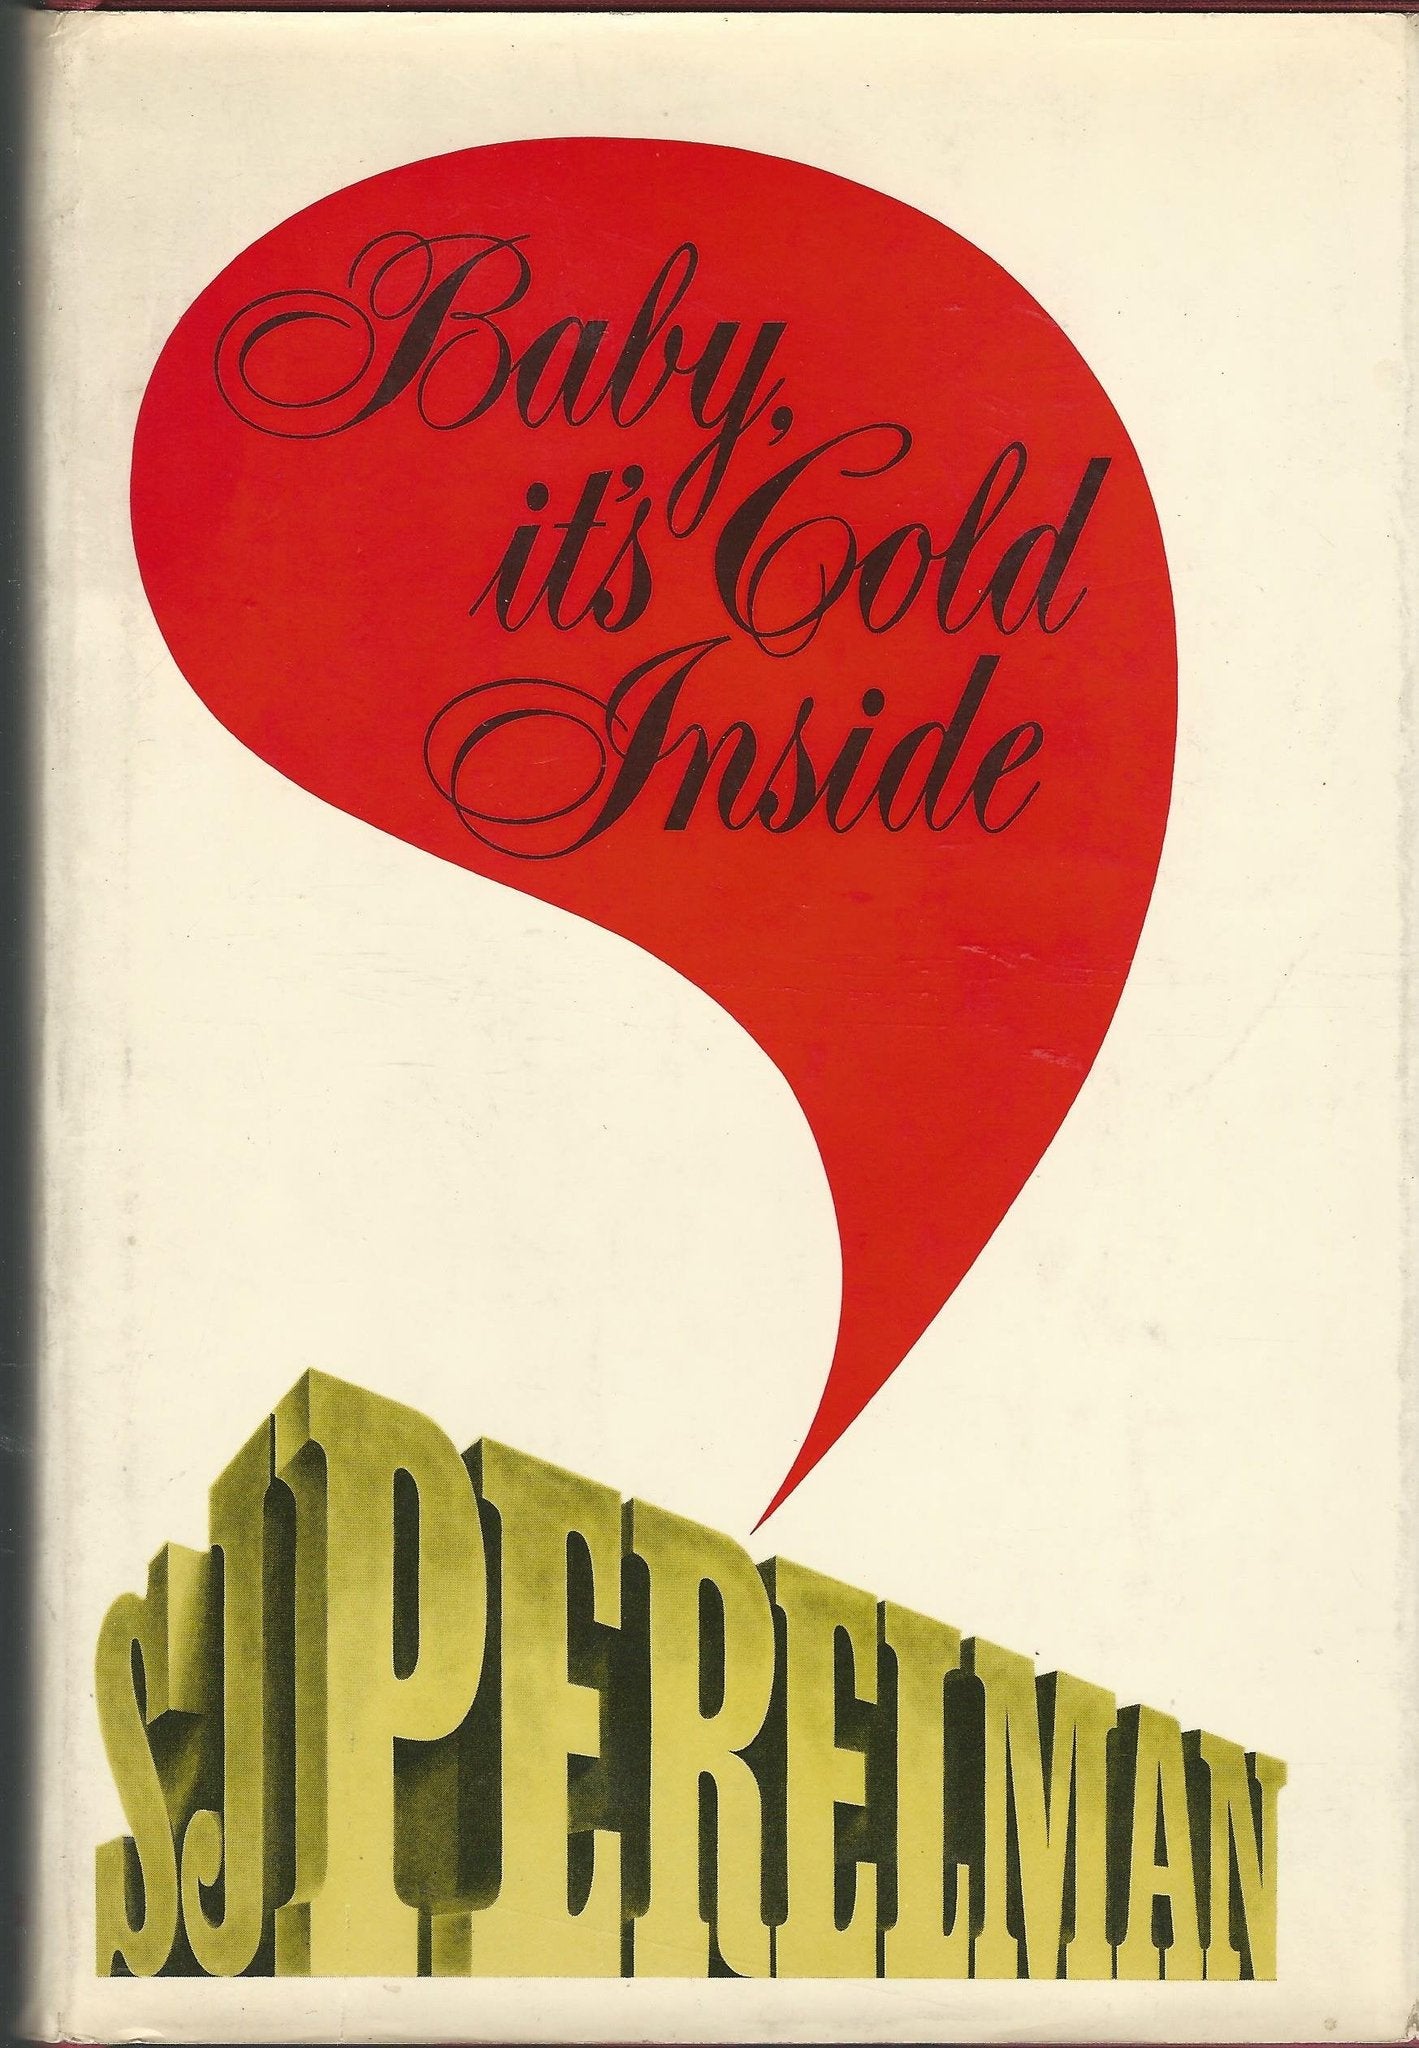 Baby, It's Cold Inside by S.J. Perelman